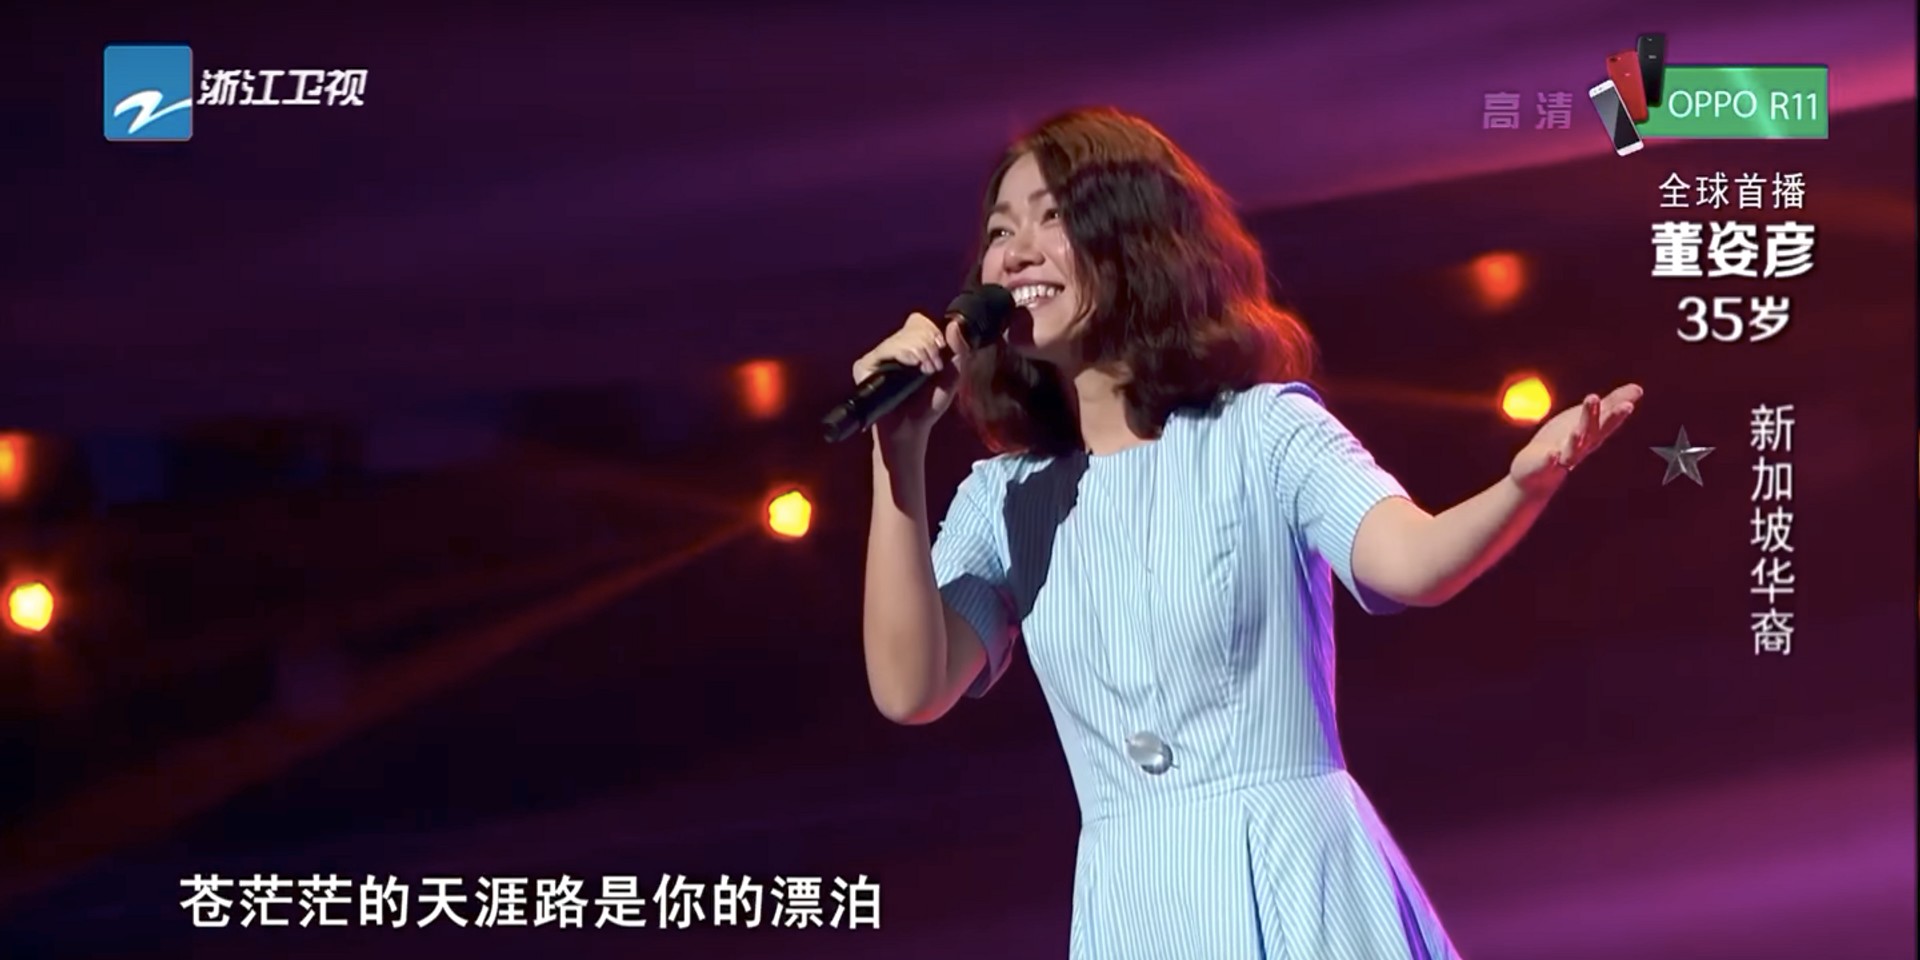 Sing! China gets Joanna Dong as Singaporean entrant, also wins over Jay Chou